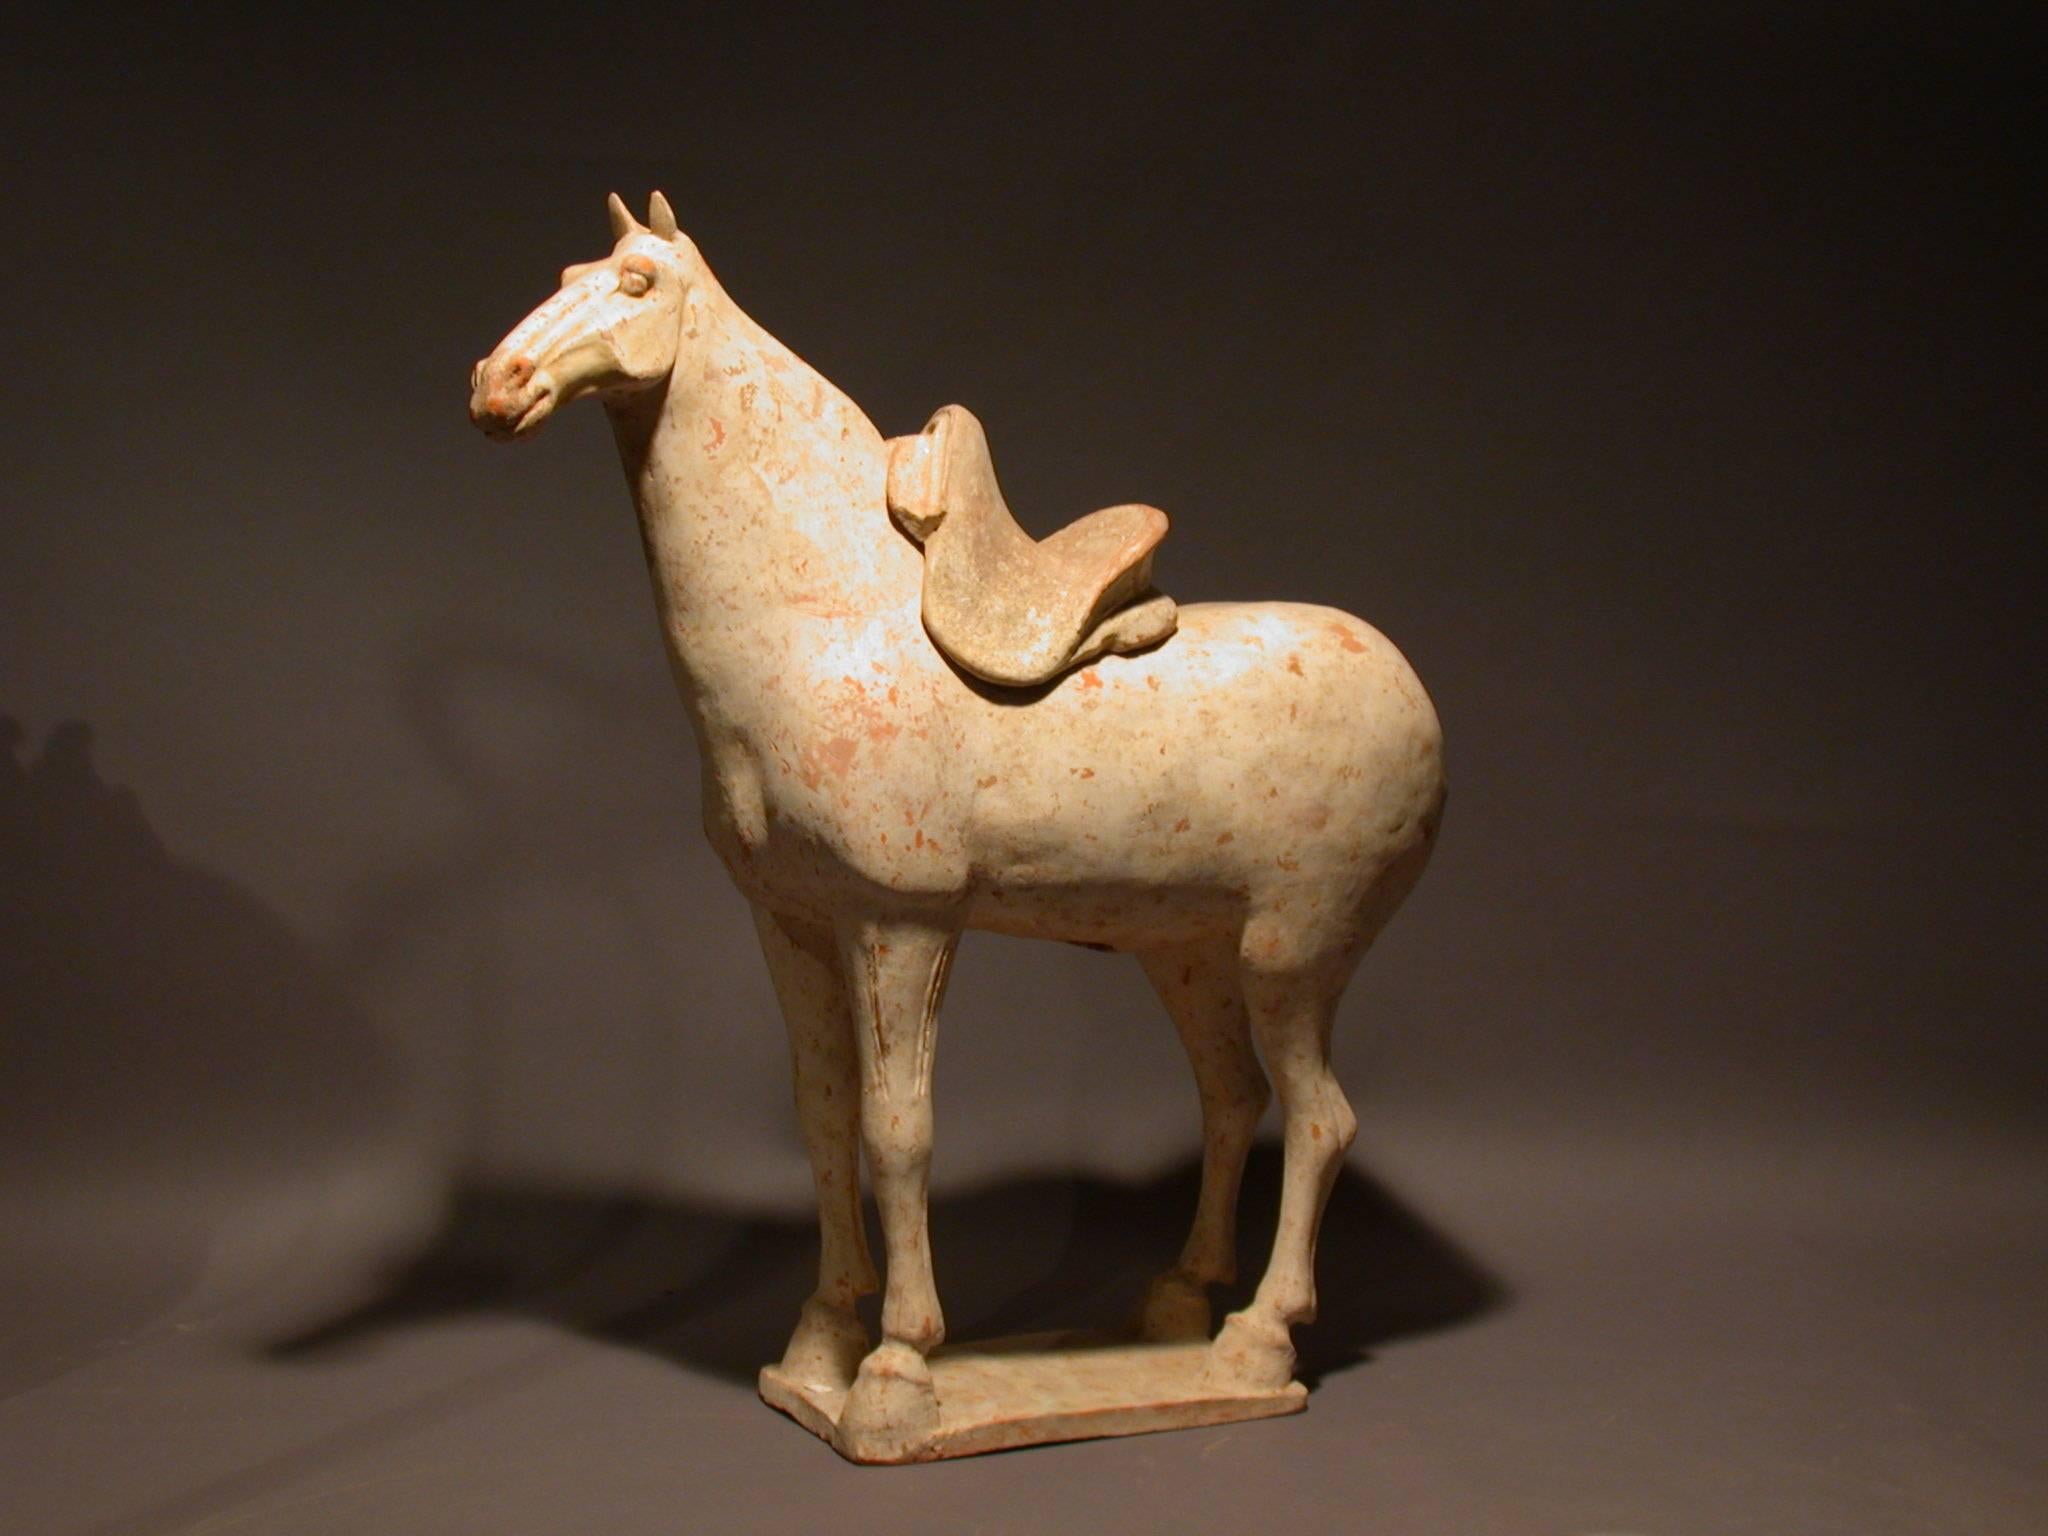 Tang dynasty pottery statue of standing horse with removable saddle, Tang dynasty 618-907, come with Oxford authentication TL test certificate. Oxford test numbers C106t33.